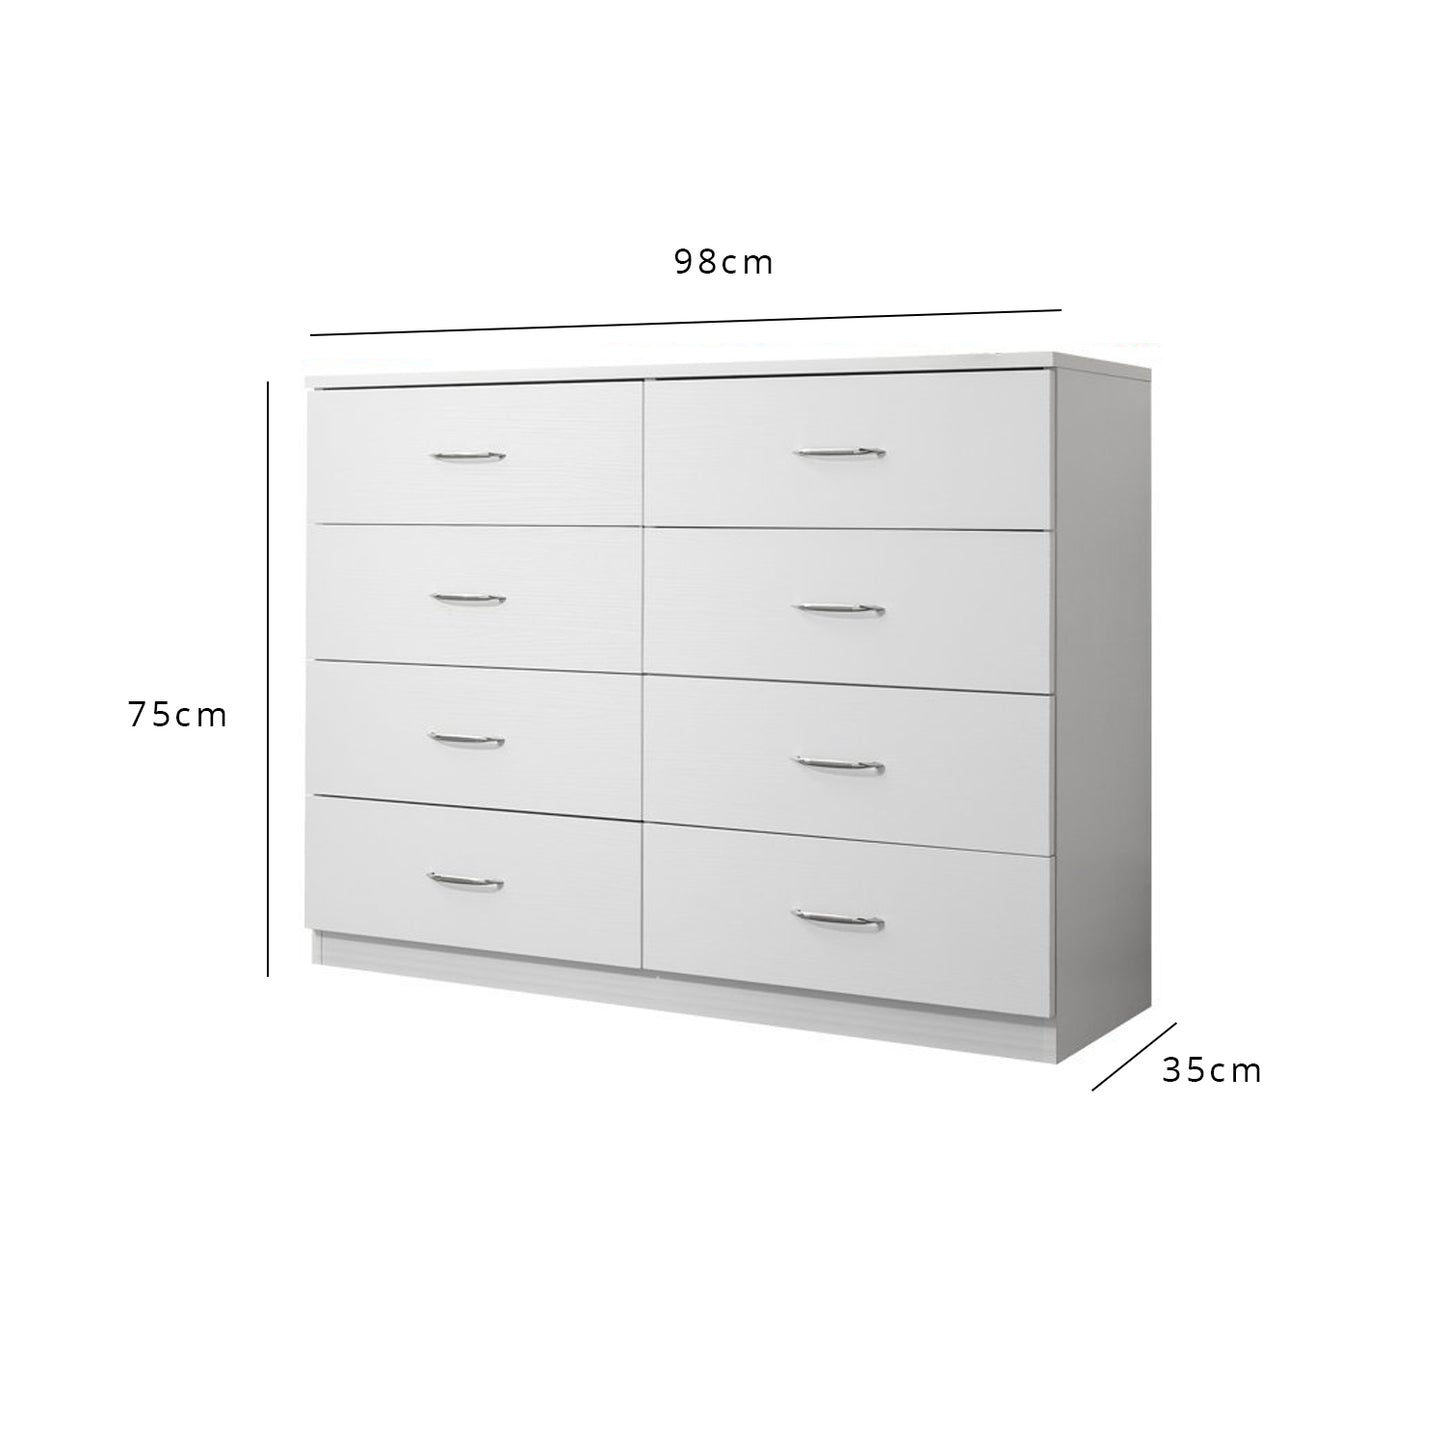 White 8 drawer chest of drawers